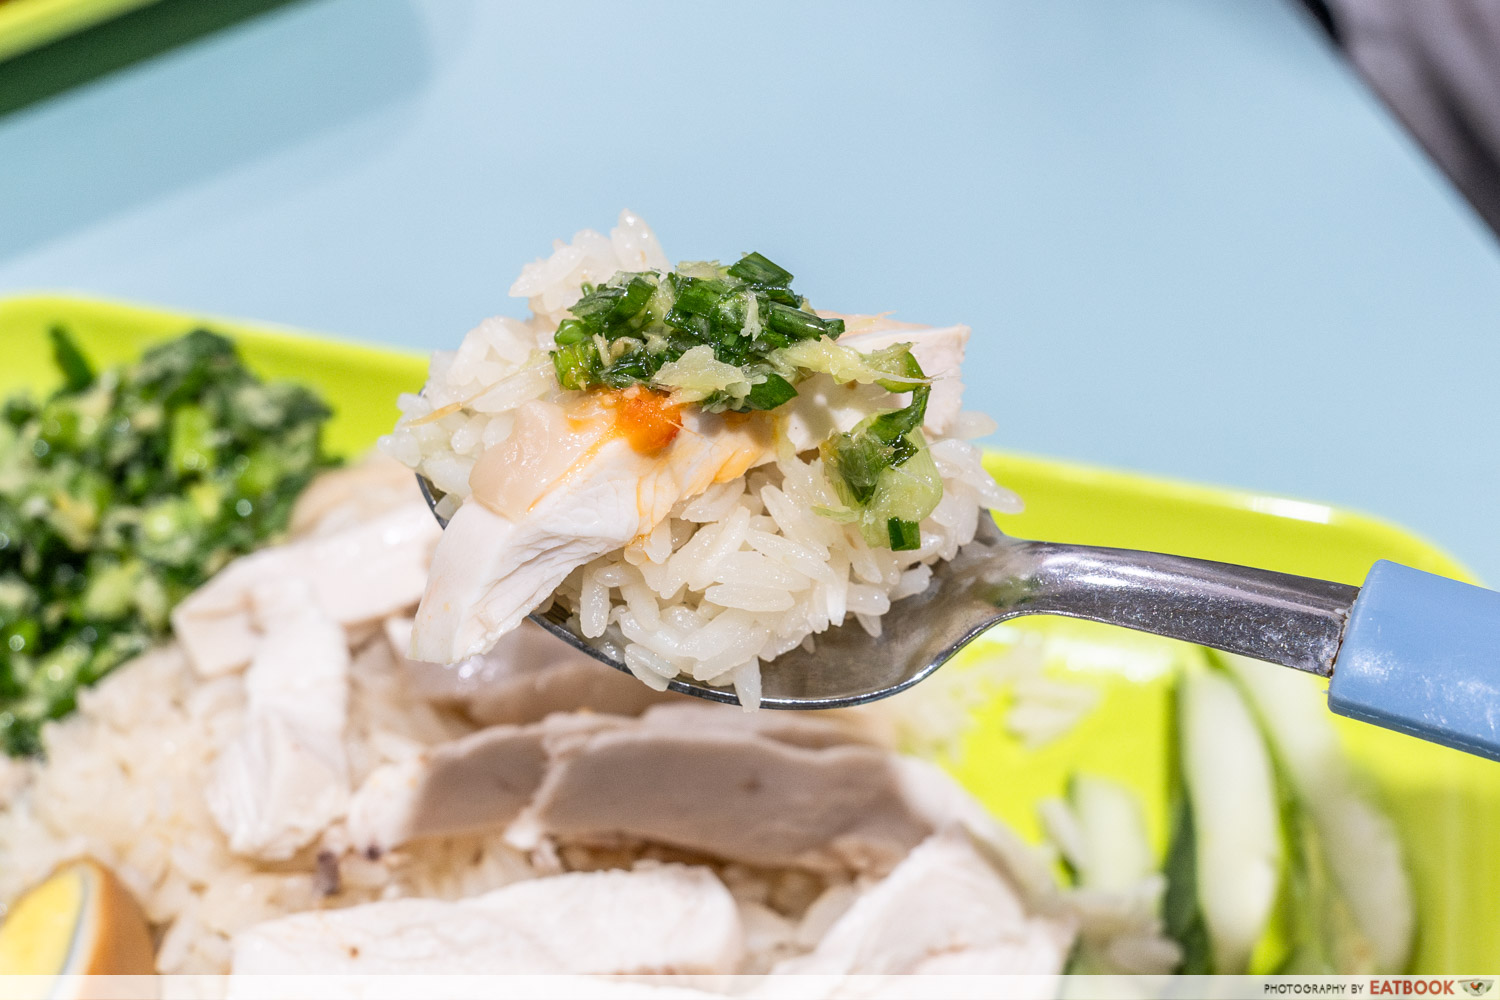 Hong-Kong-Lung-Hwa-steamed-chicken-rice-interaction